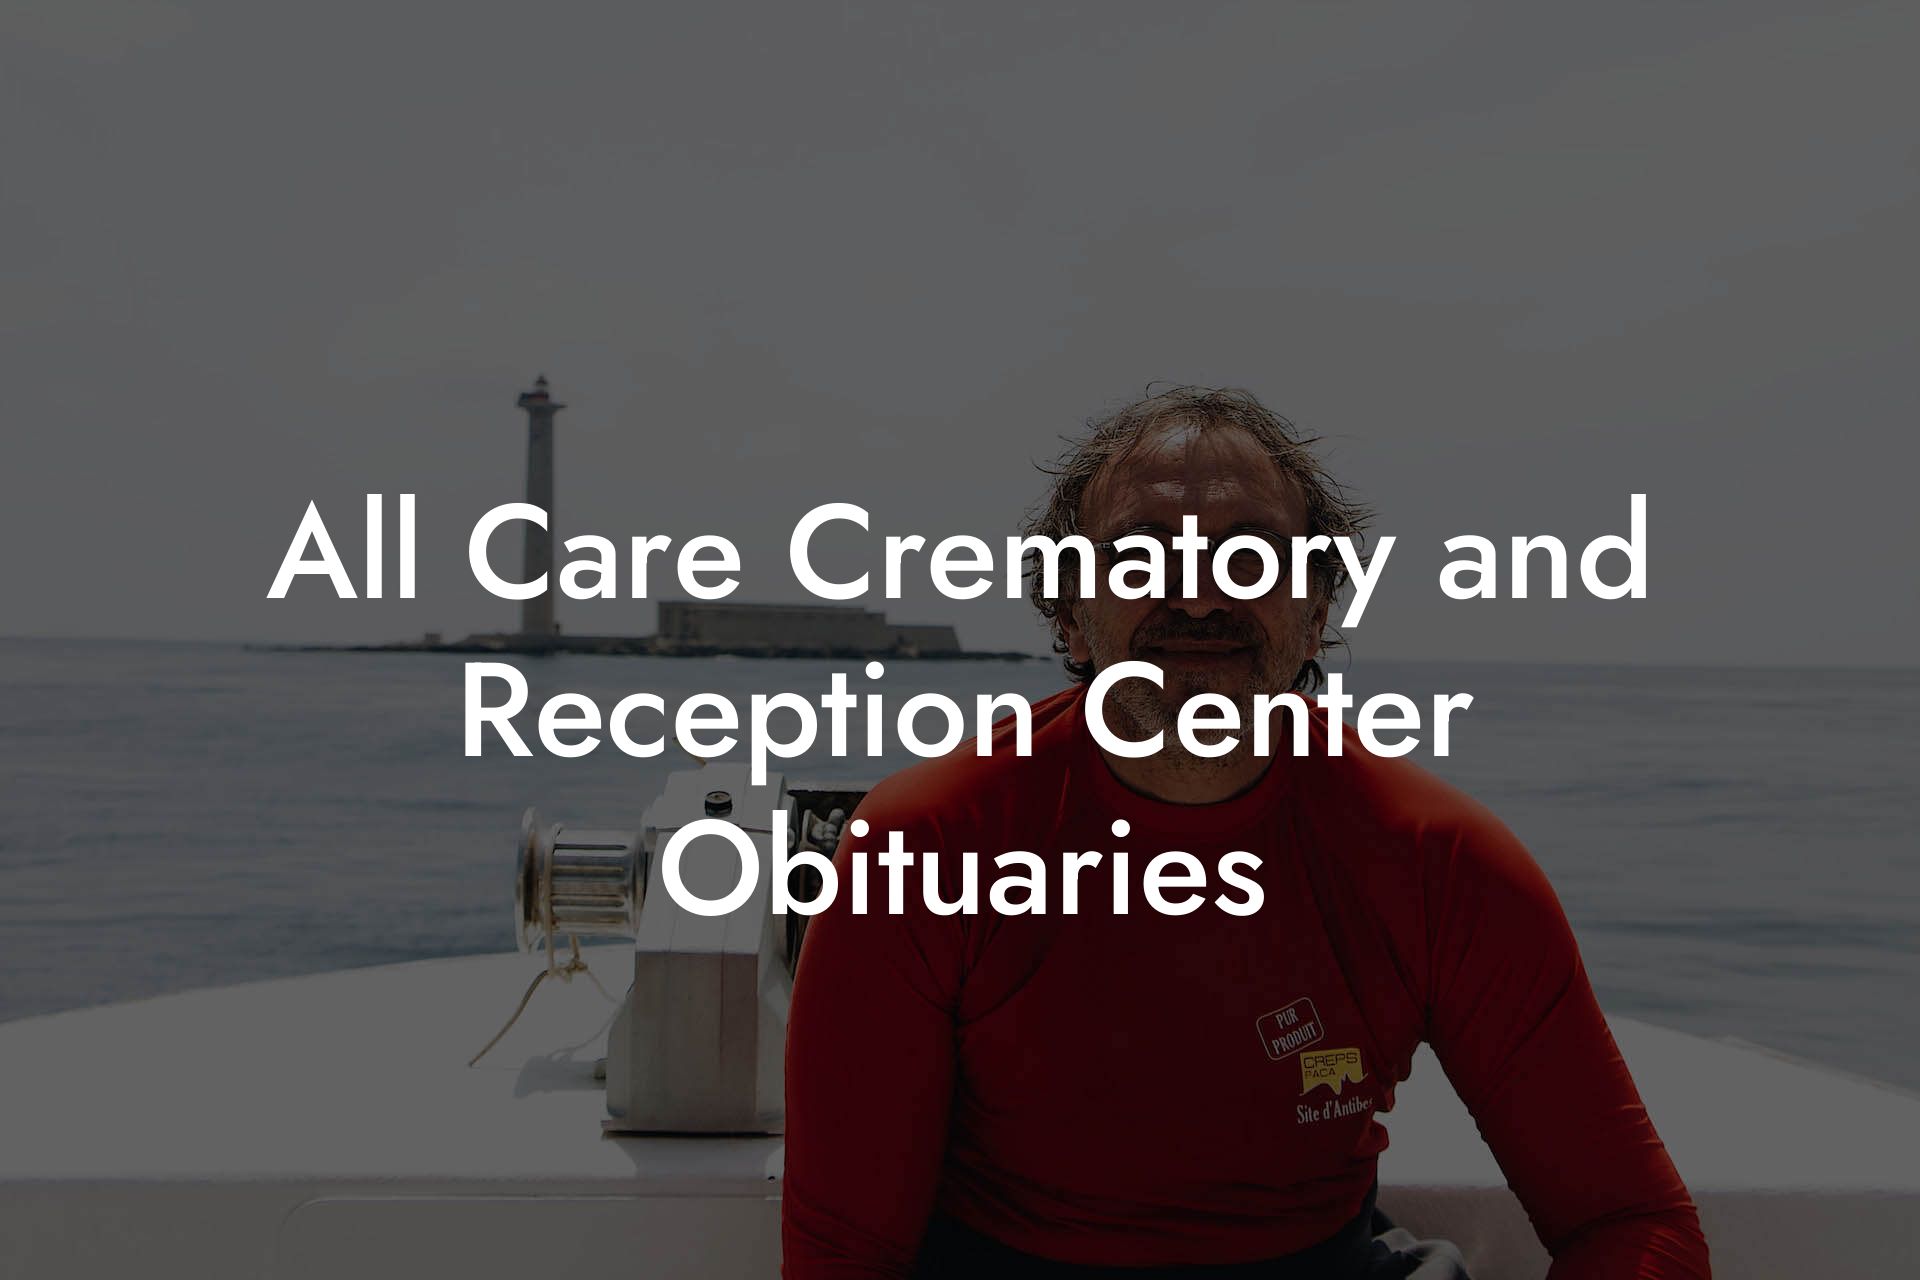 All Care Crematory and Reception Center Obituaries